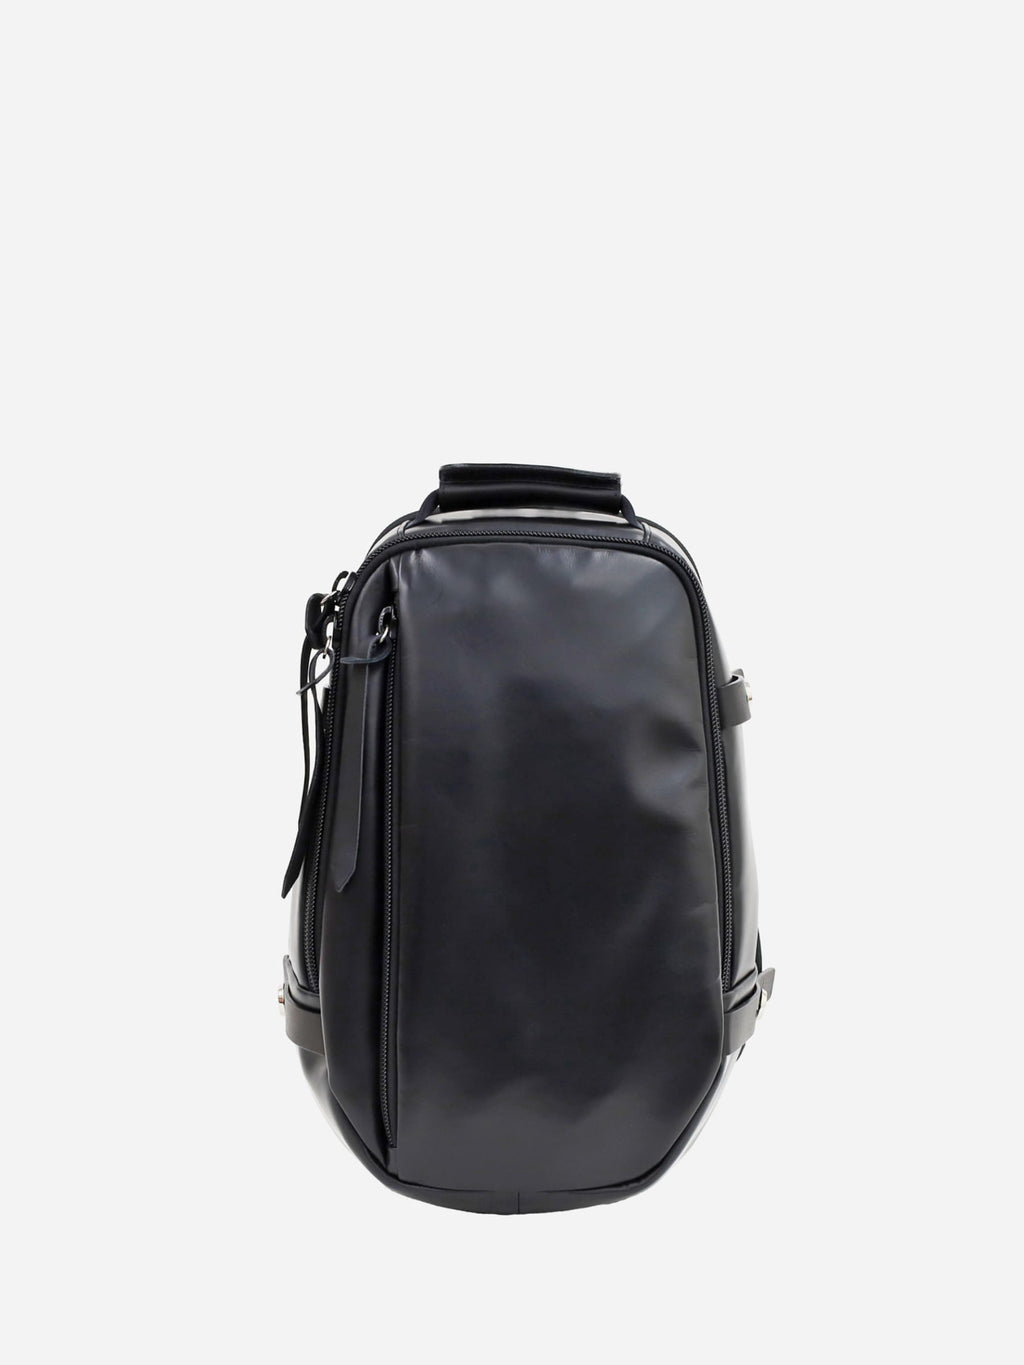 PACK-5 leather backpack (for 14inch pc) スタイリングがキマる 